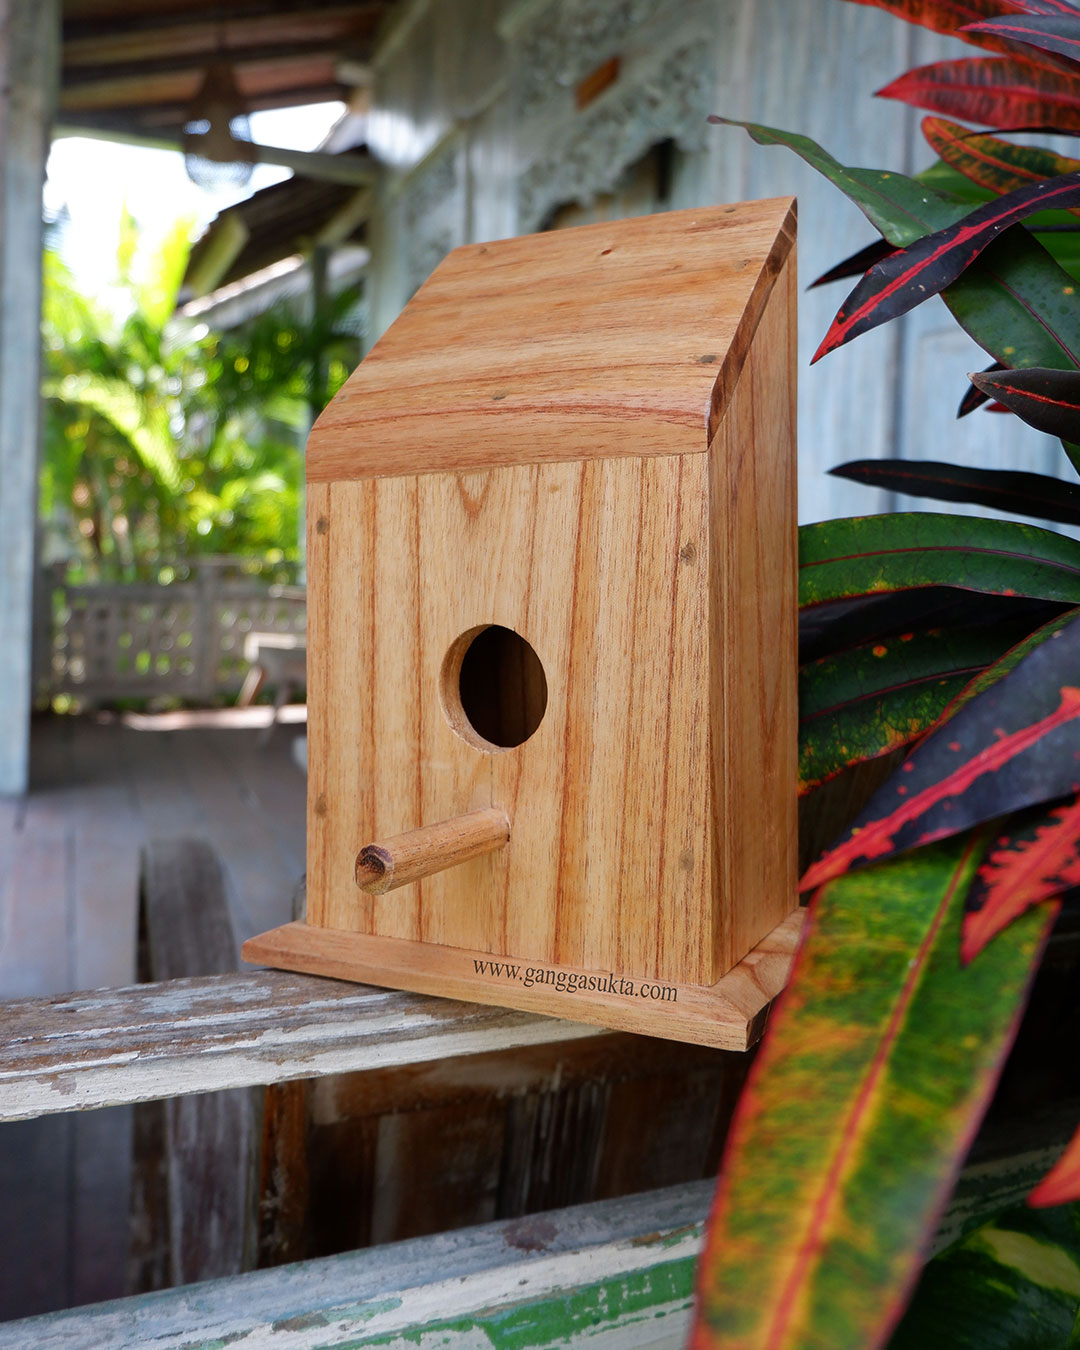 Wooden-Bird-House-Natural-Color-for-hanging-outdoor-decoration-Garden-Balcony-Decoration-High-Quality-Wood